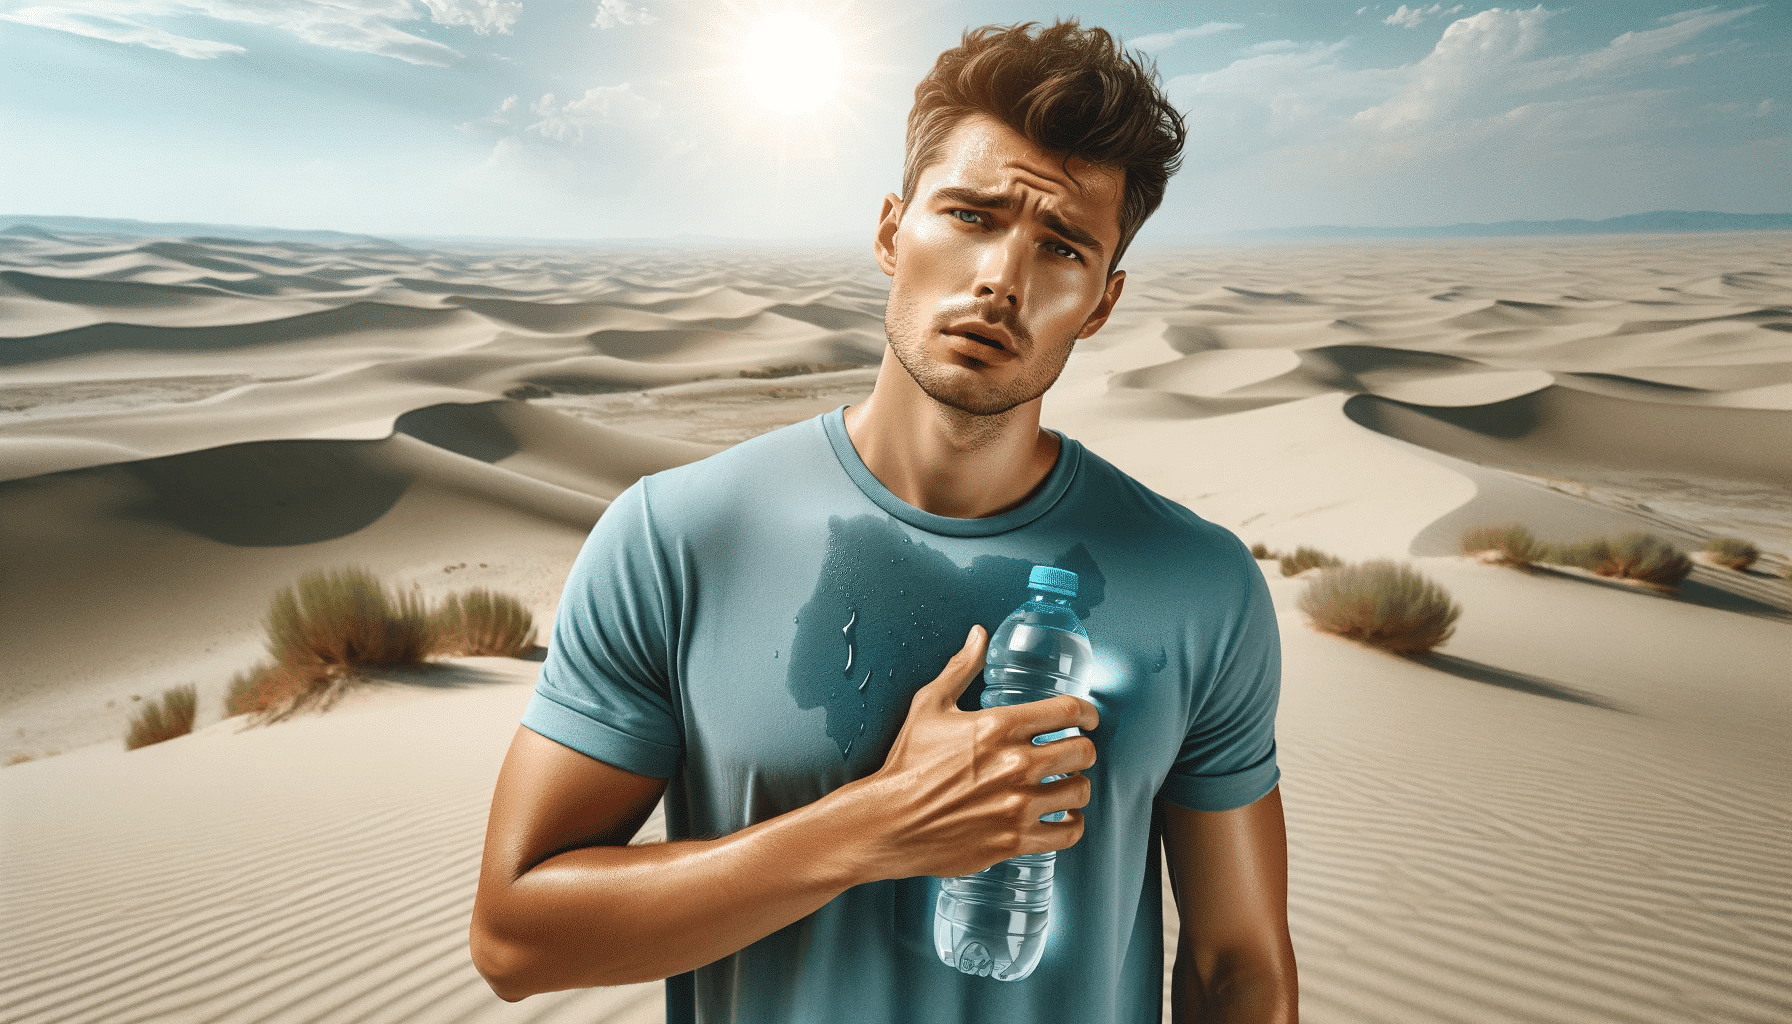 A highly realistic wide image of a person feeling hot in a dry dune filled landscape holding a water bottle. The individual a young Caucasian man